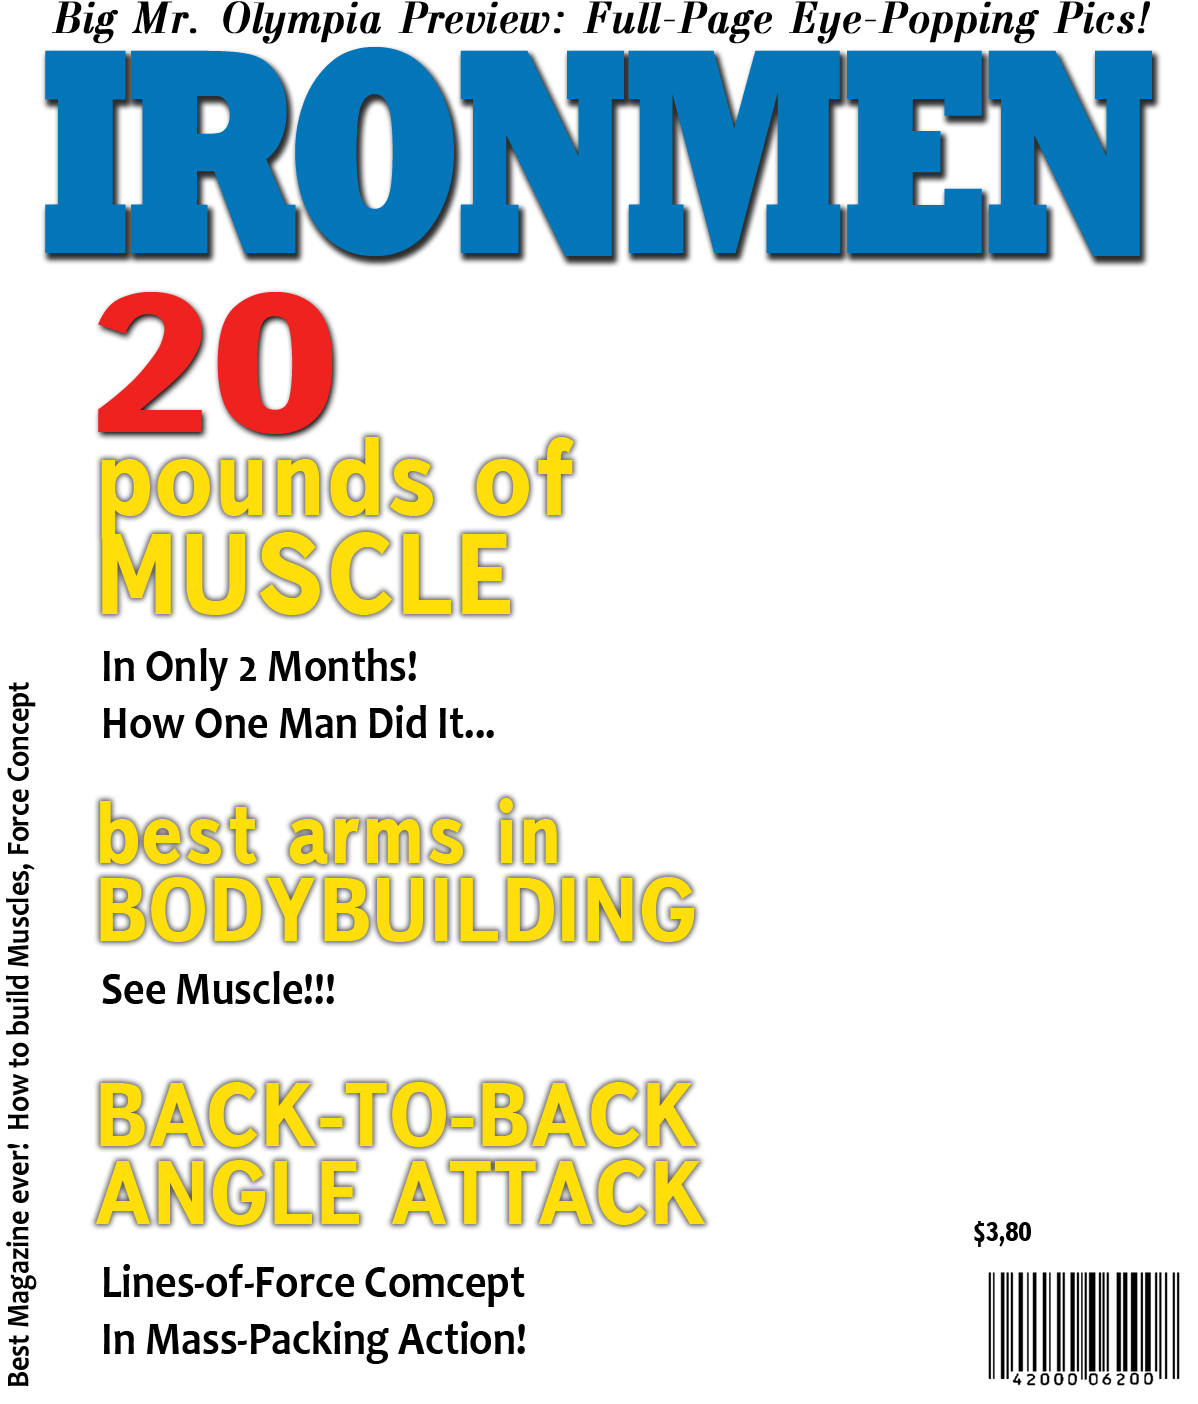 Iron Man Magazine Cover Muscle Gain Promotion PNG